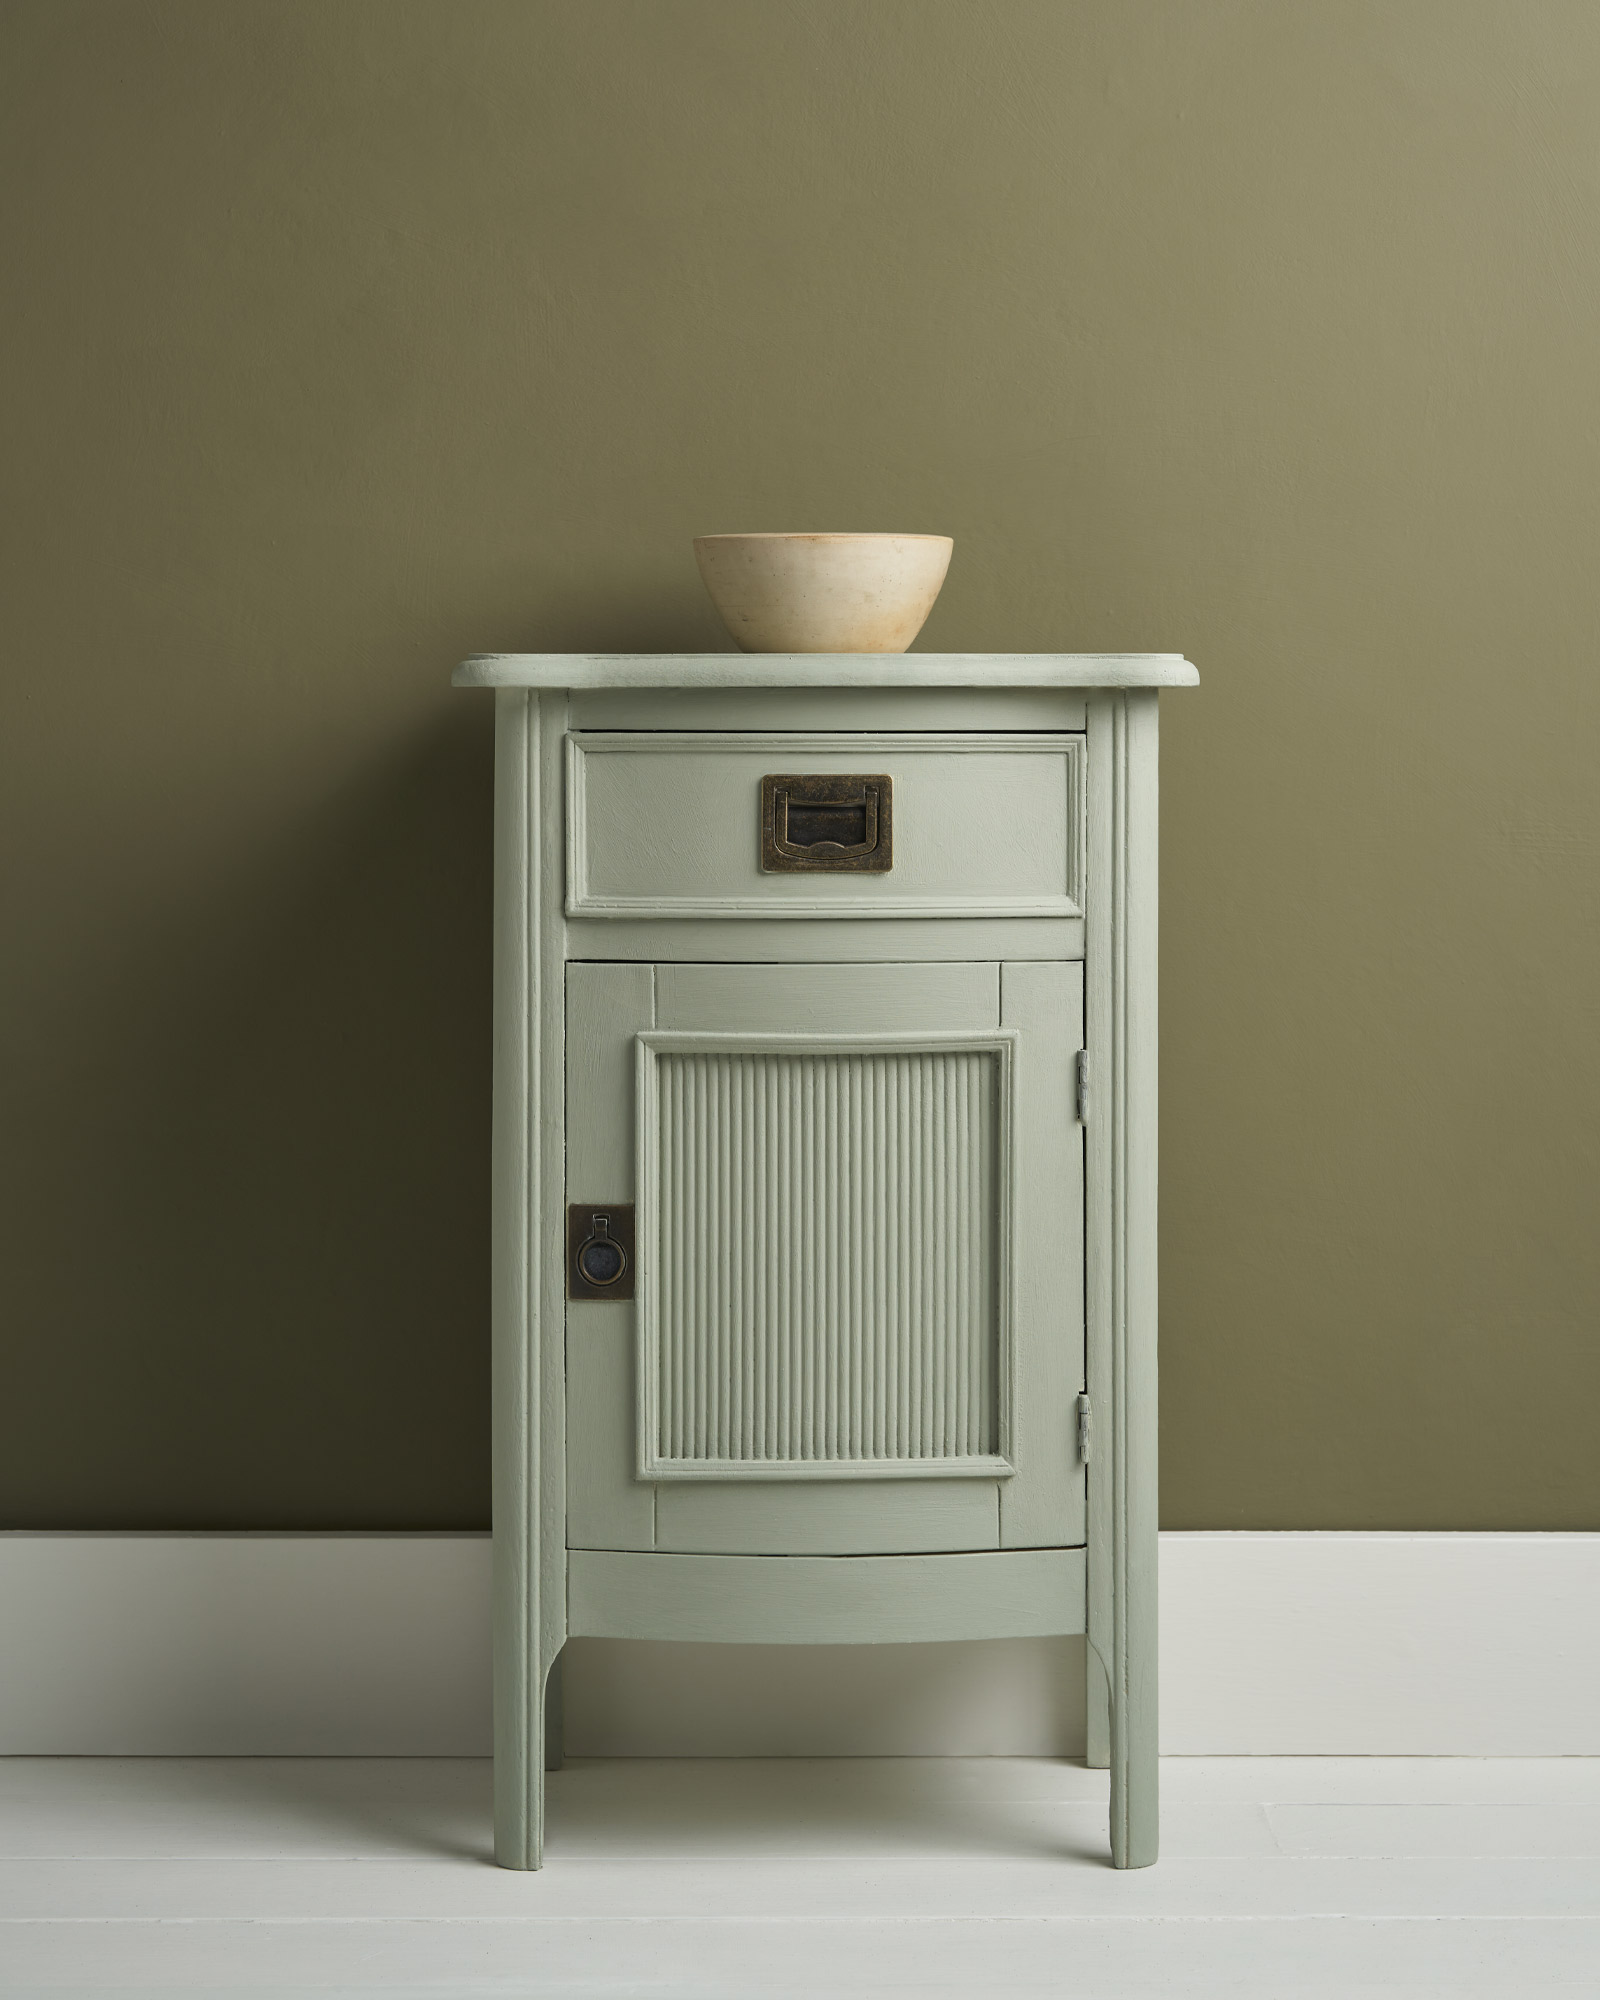 Side Table Painted in Coolabah Green Chalk Paint and Staged against Olive Wall Paint Background